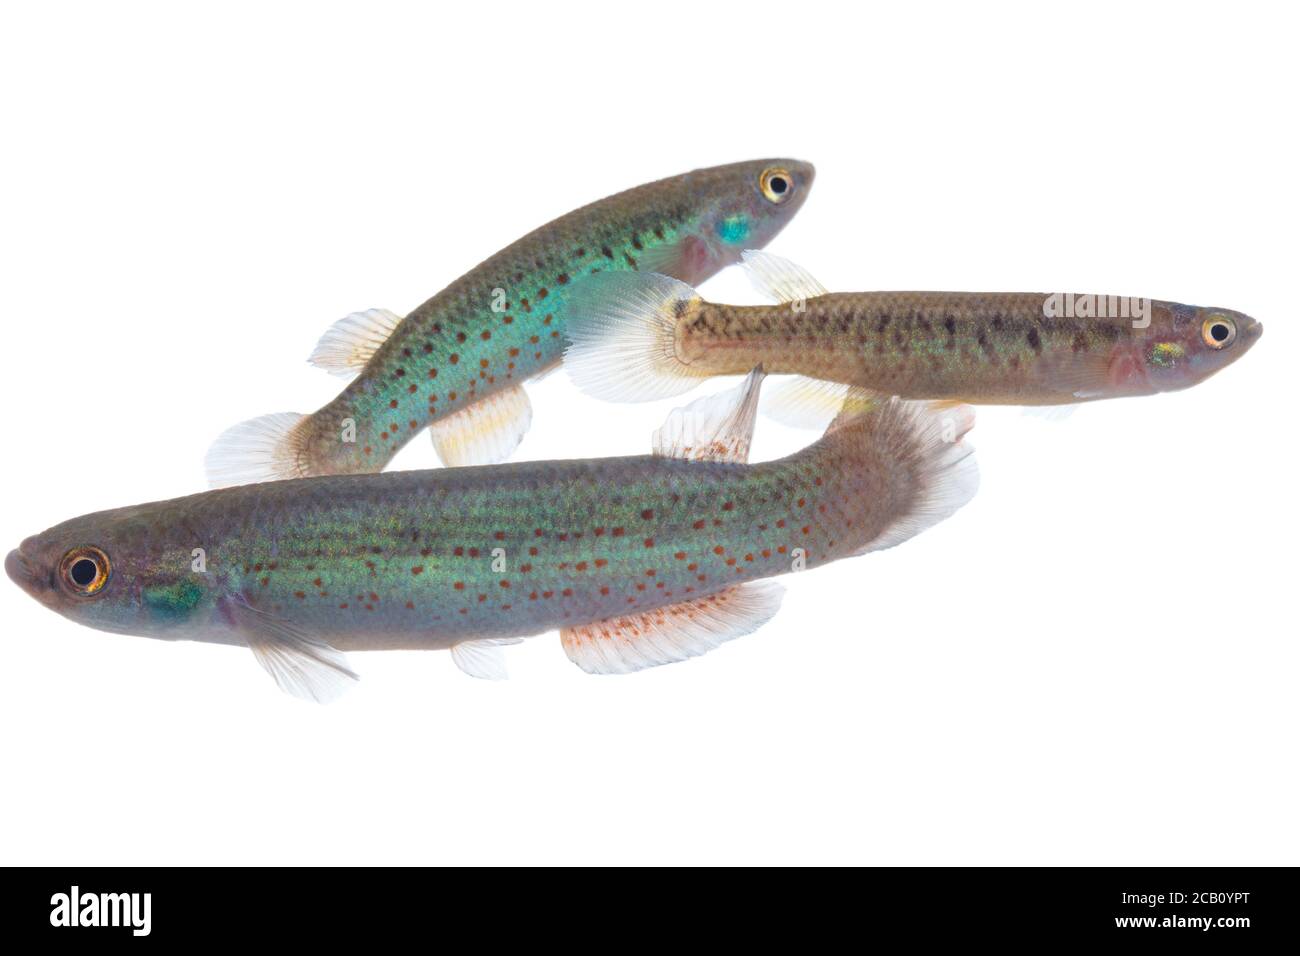 Two females and one male of the Magdalena rivulin (Cynodonichthys magdalenae), a freshwater fish the rivulin family in the order of the Cyprinodontifo Stock Photo